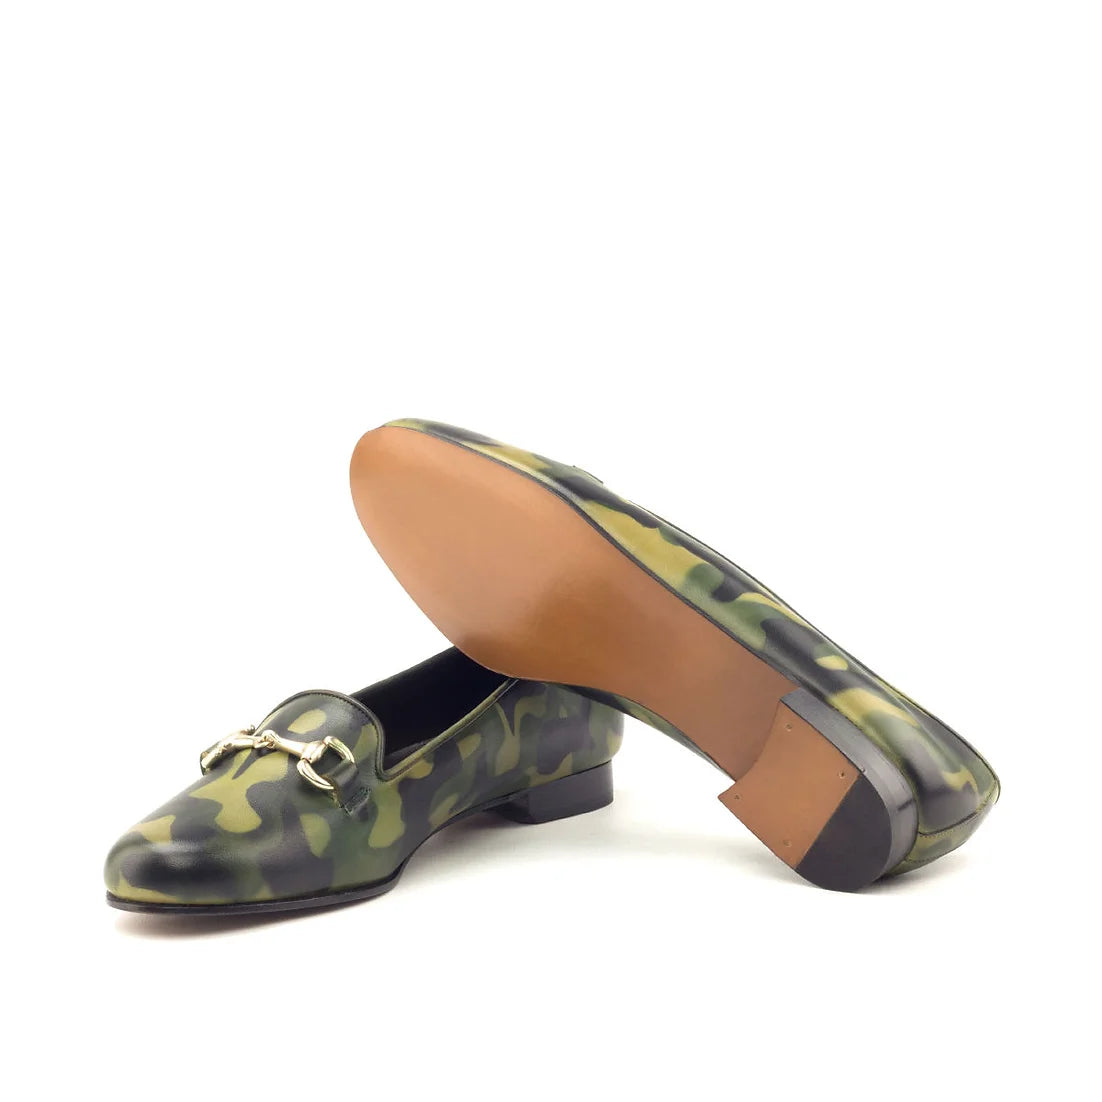 Women's Forest Camo Patina Delayla Loafer